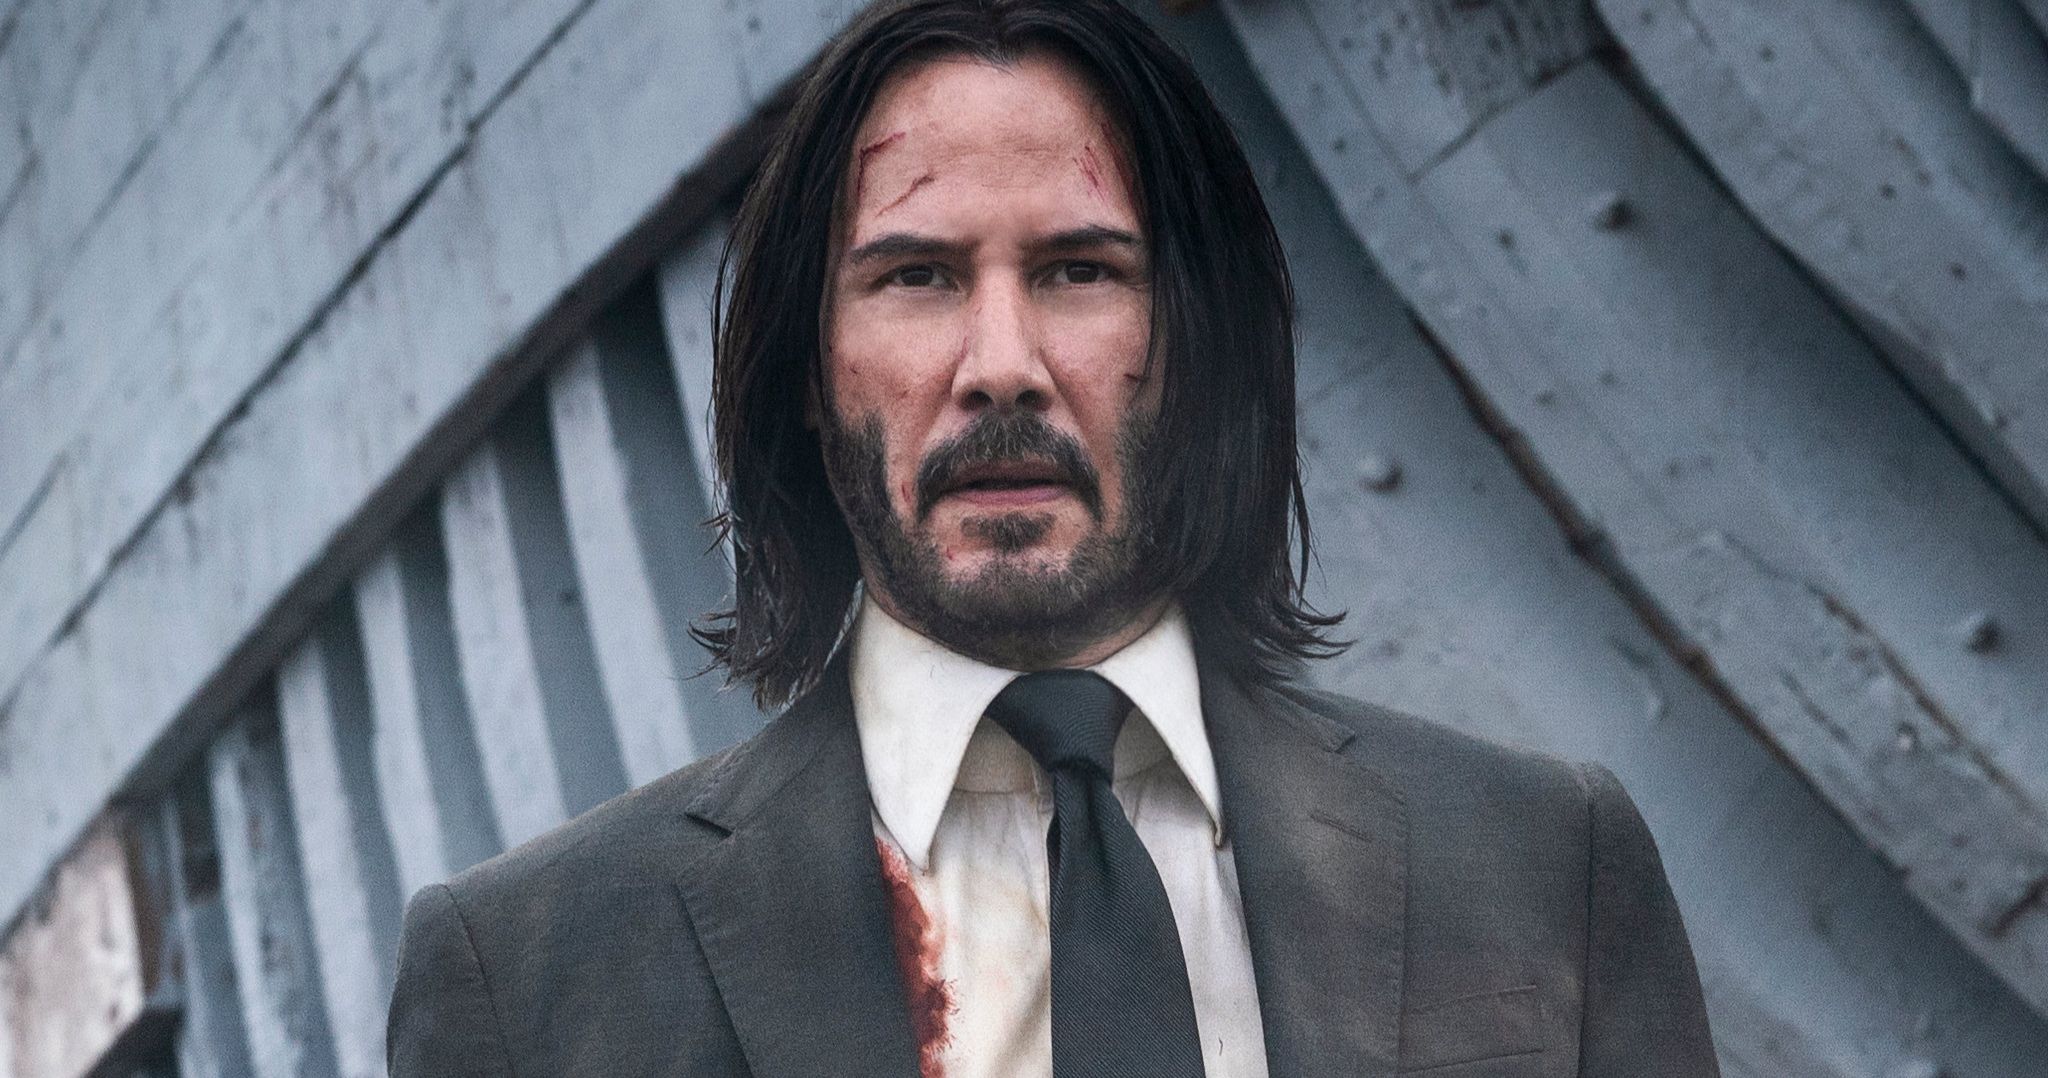 John Wick Creator Won't Return for Parts 4 and 5, But Wishes Franchise Well